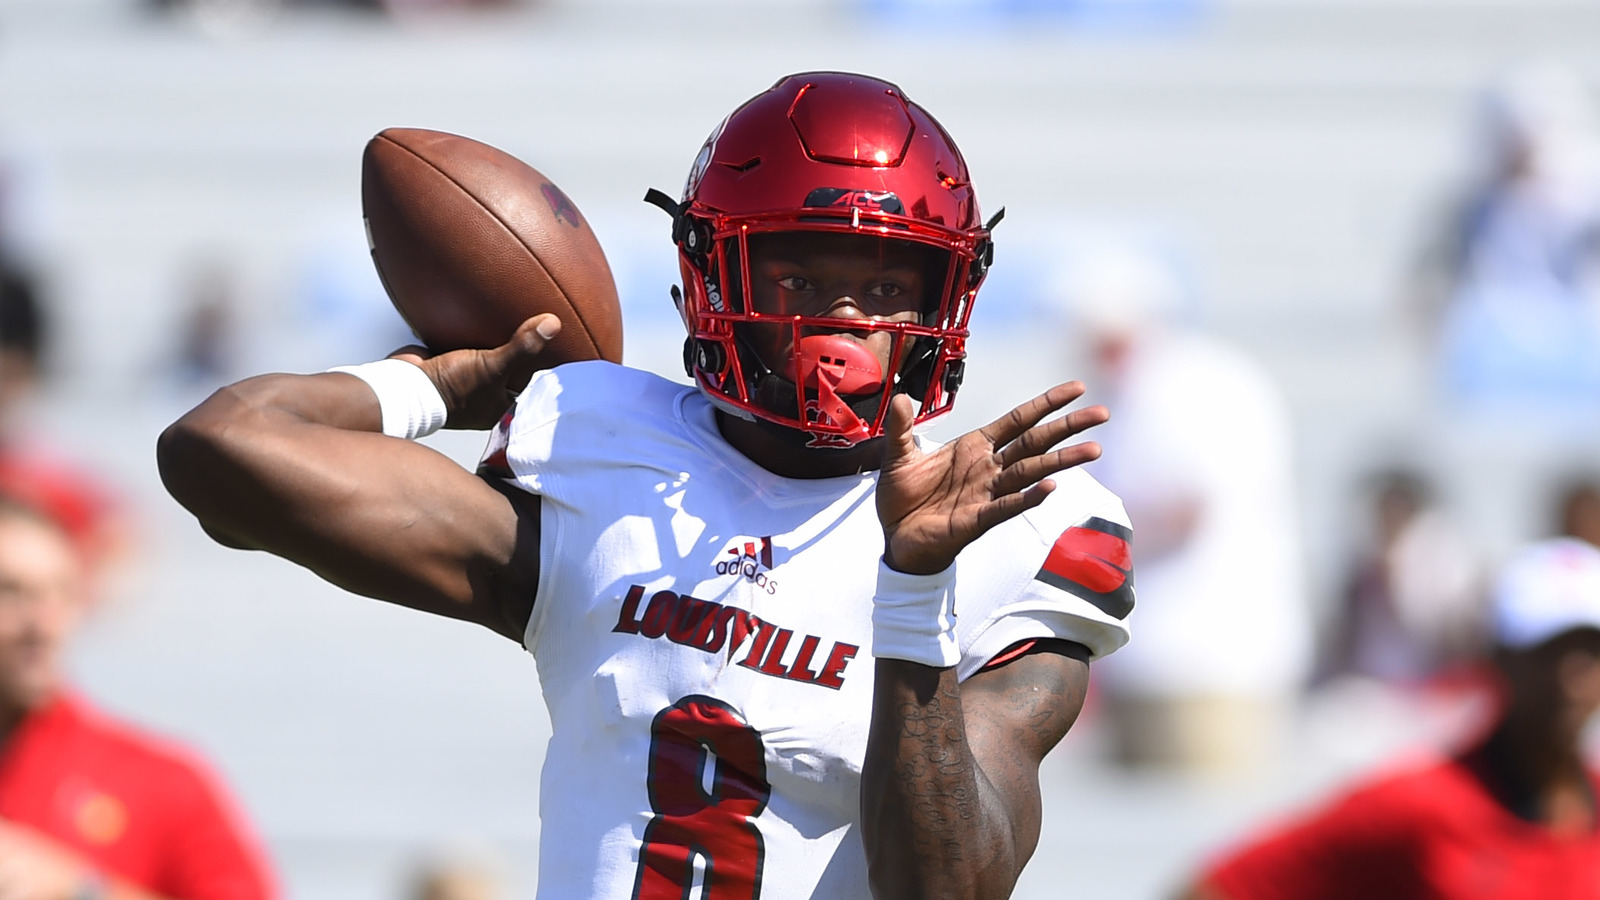 Free Download Dabo Swinney Lamar Jackson Is An Unbelievable Player Images, Photos, Reviews